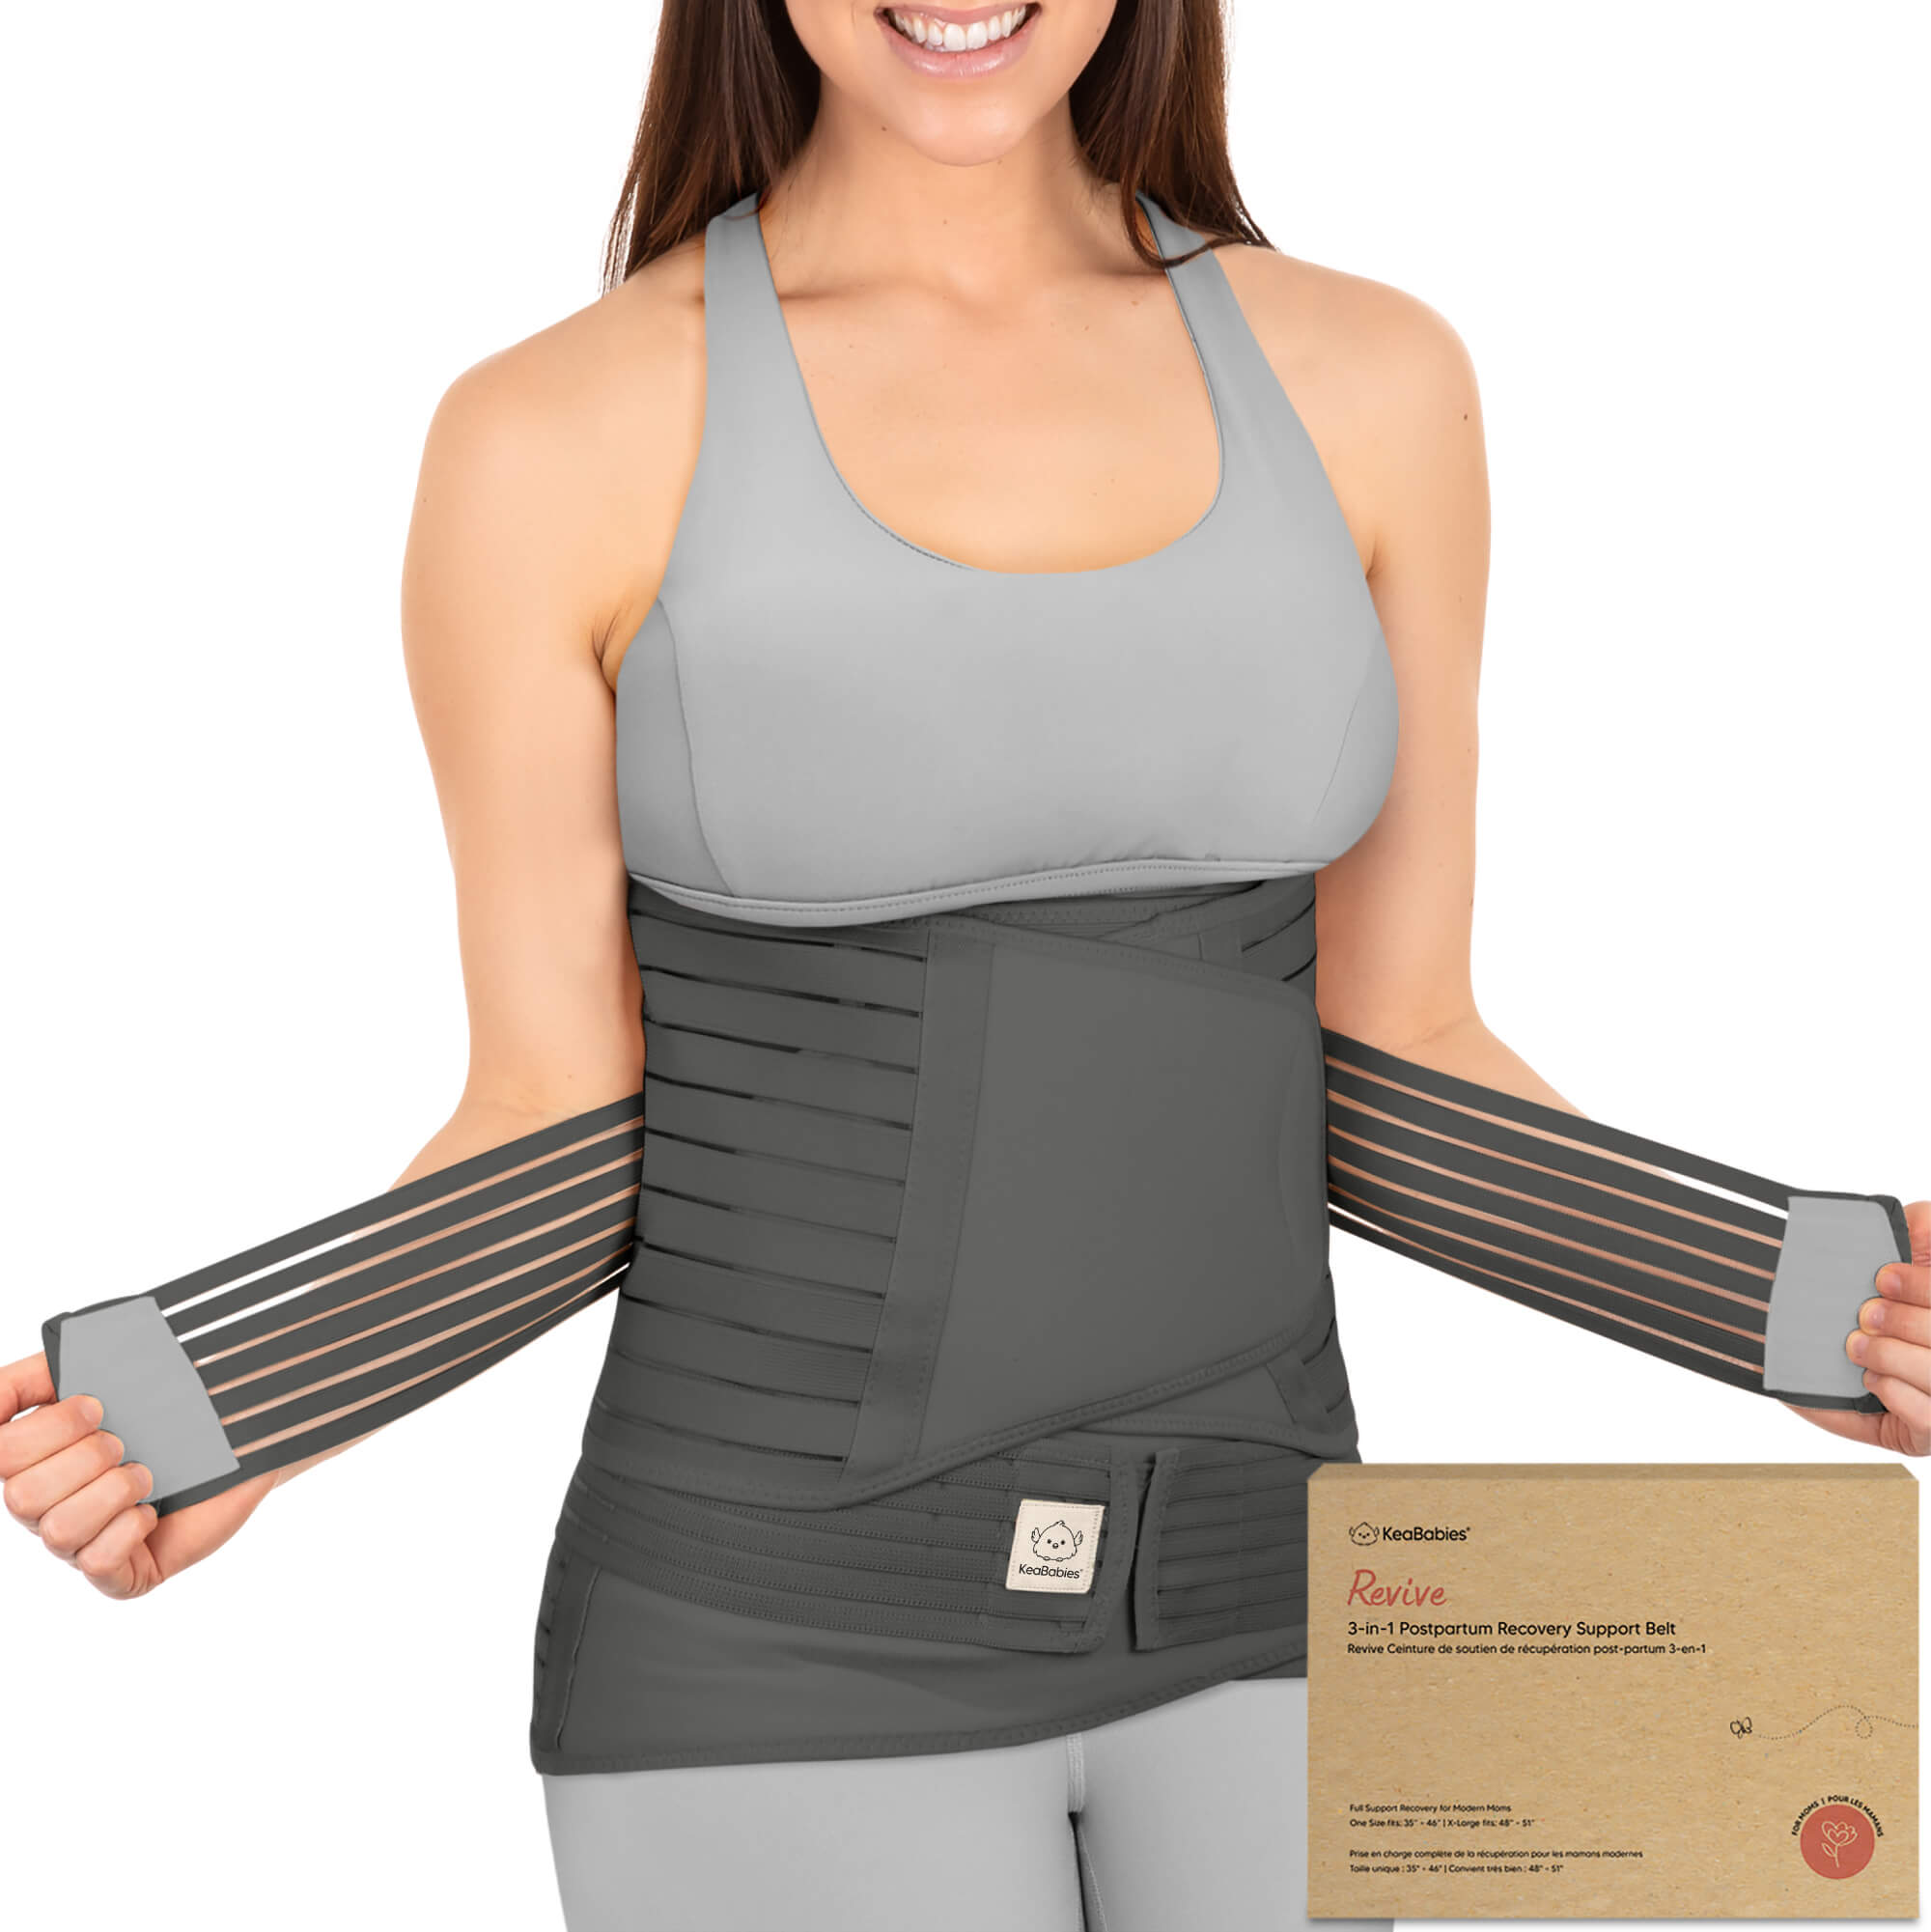 Did you know the 3 in 1 postpartum belt is based on the